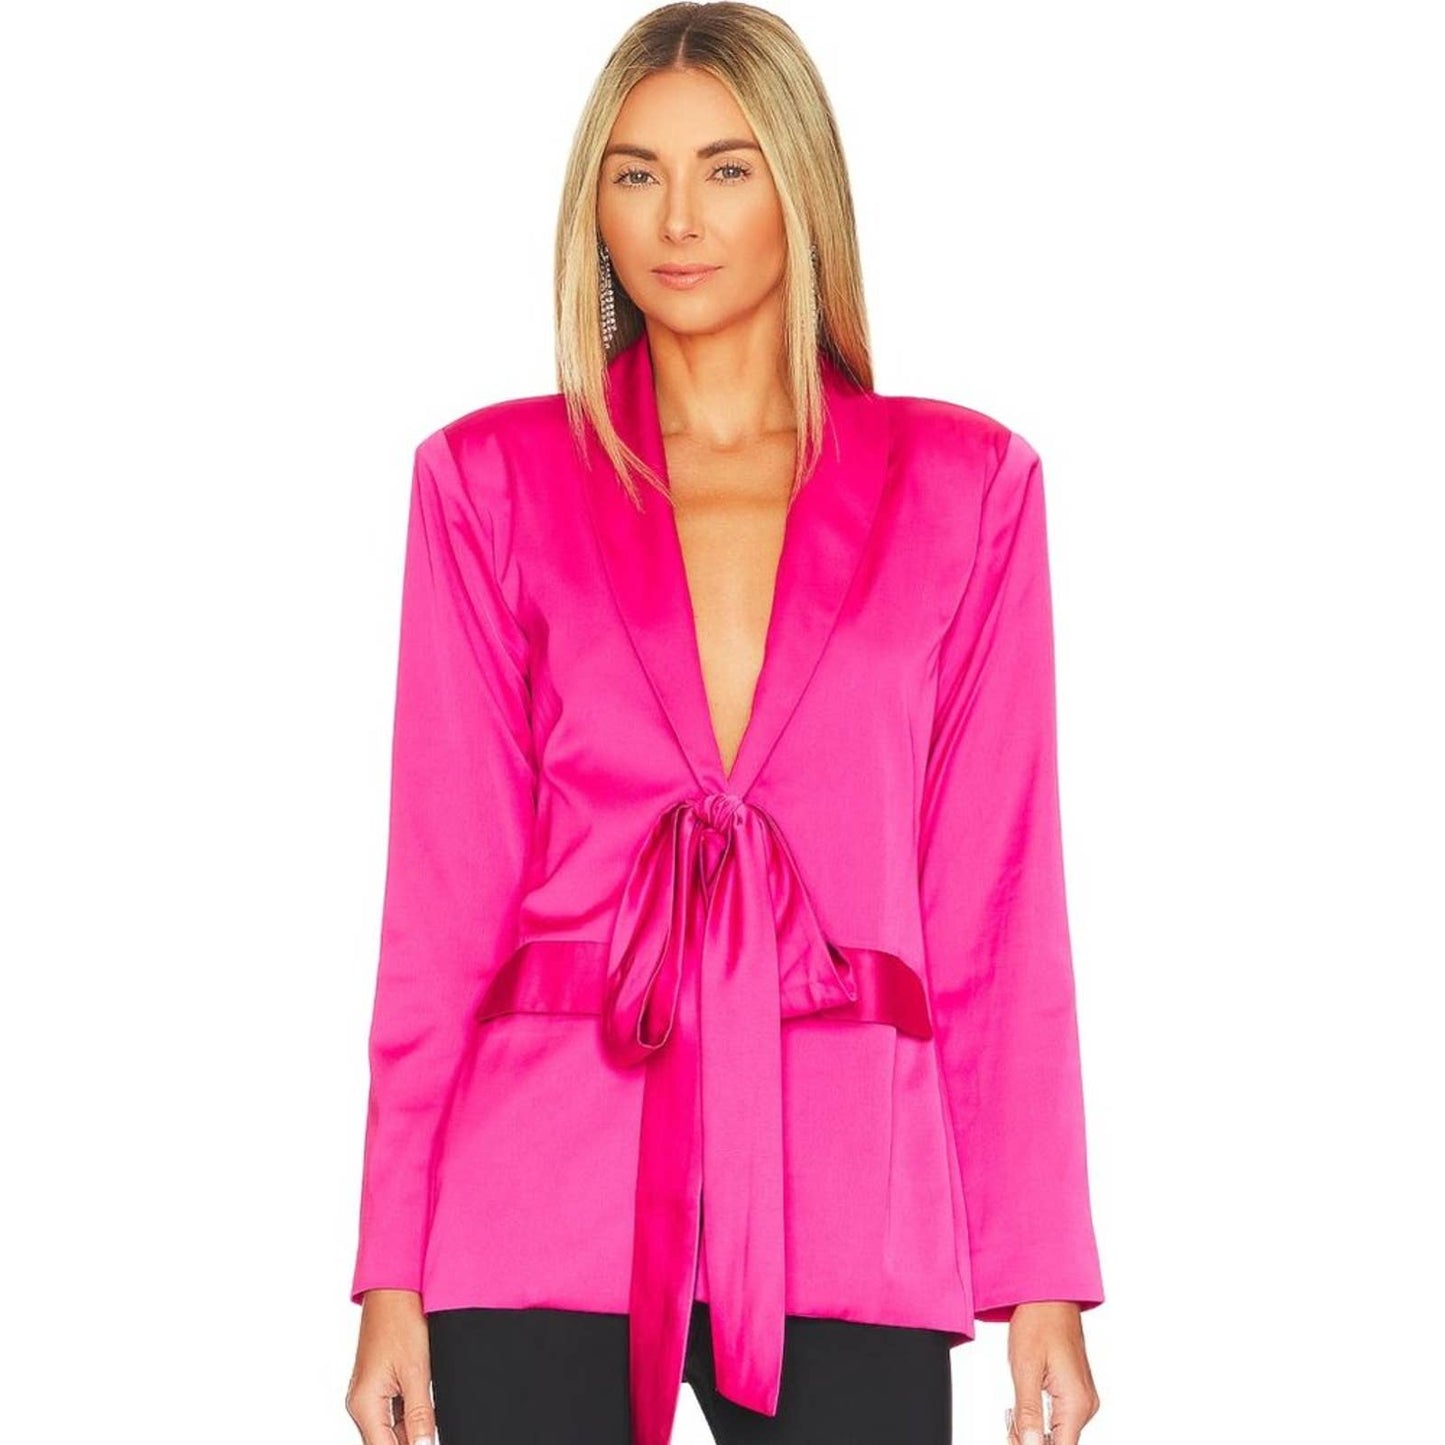 Lovers and Friends Taylor Blazer in Hot Pink NWT Size Small